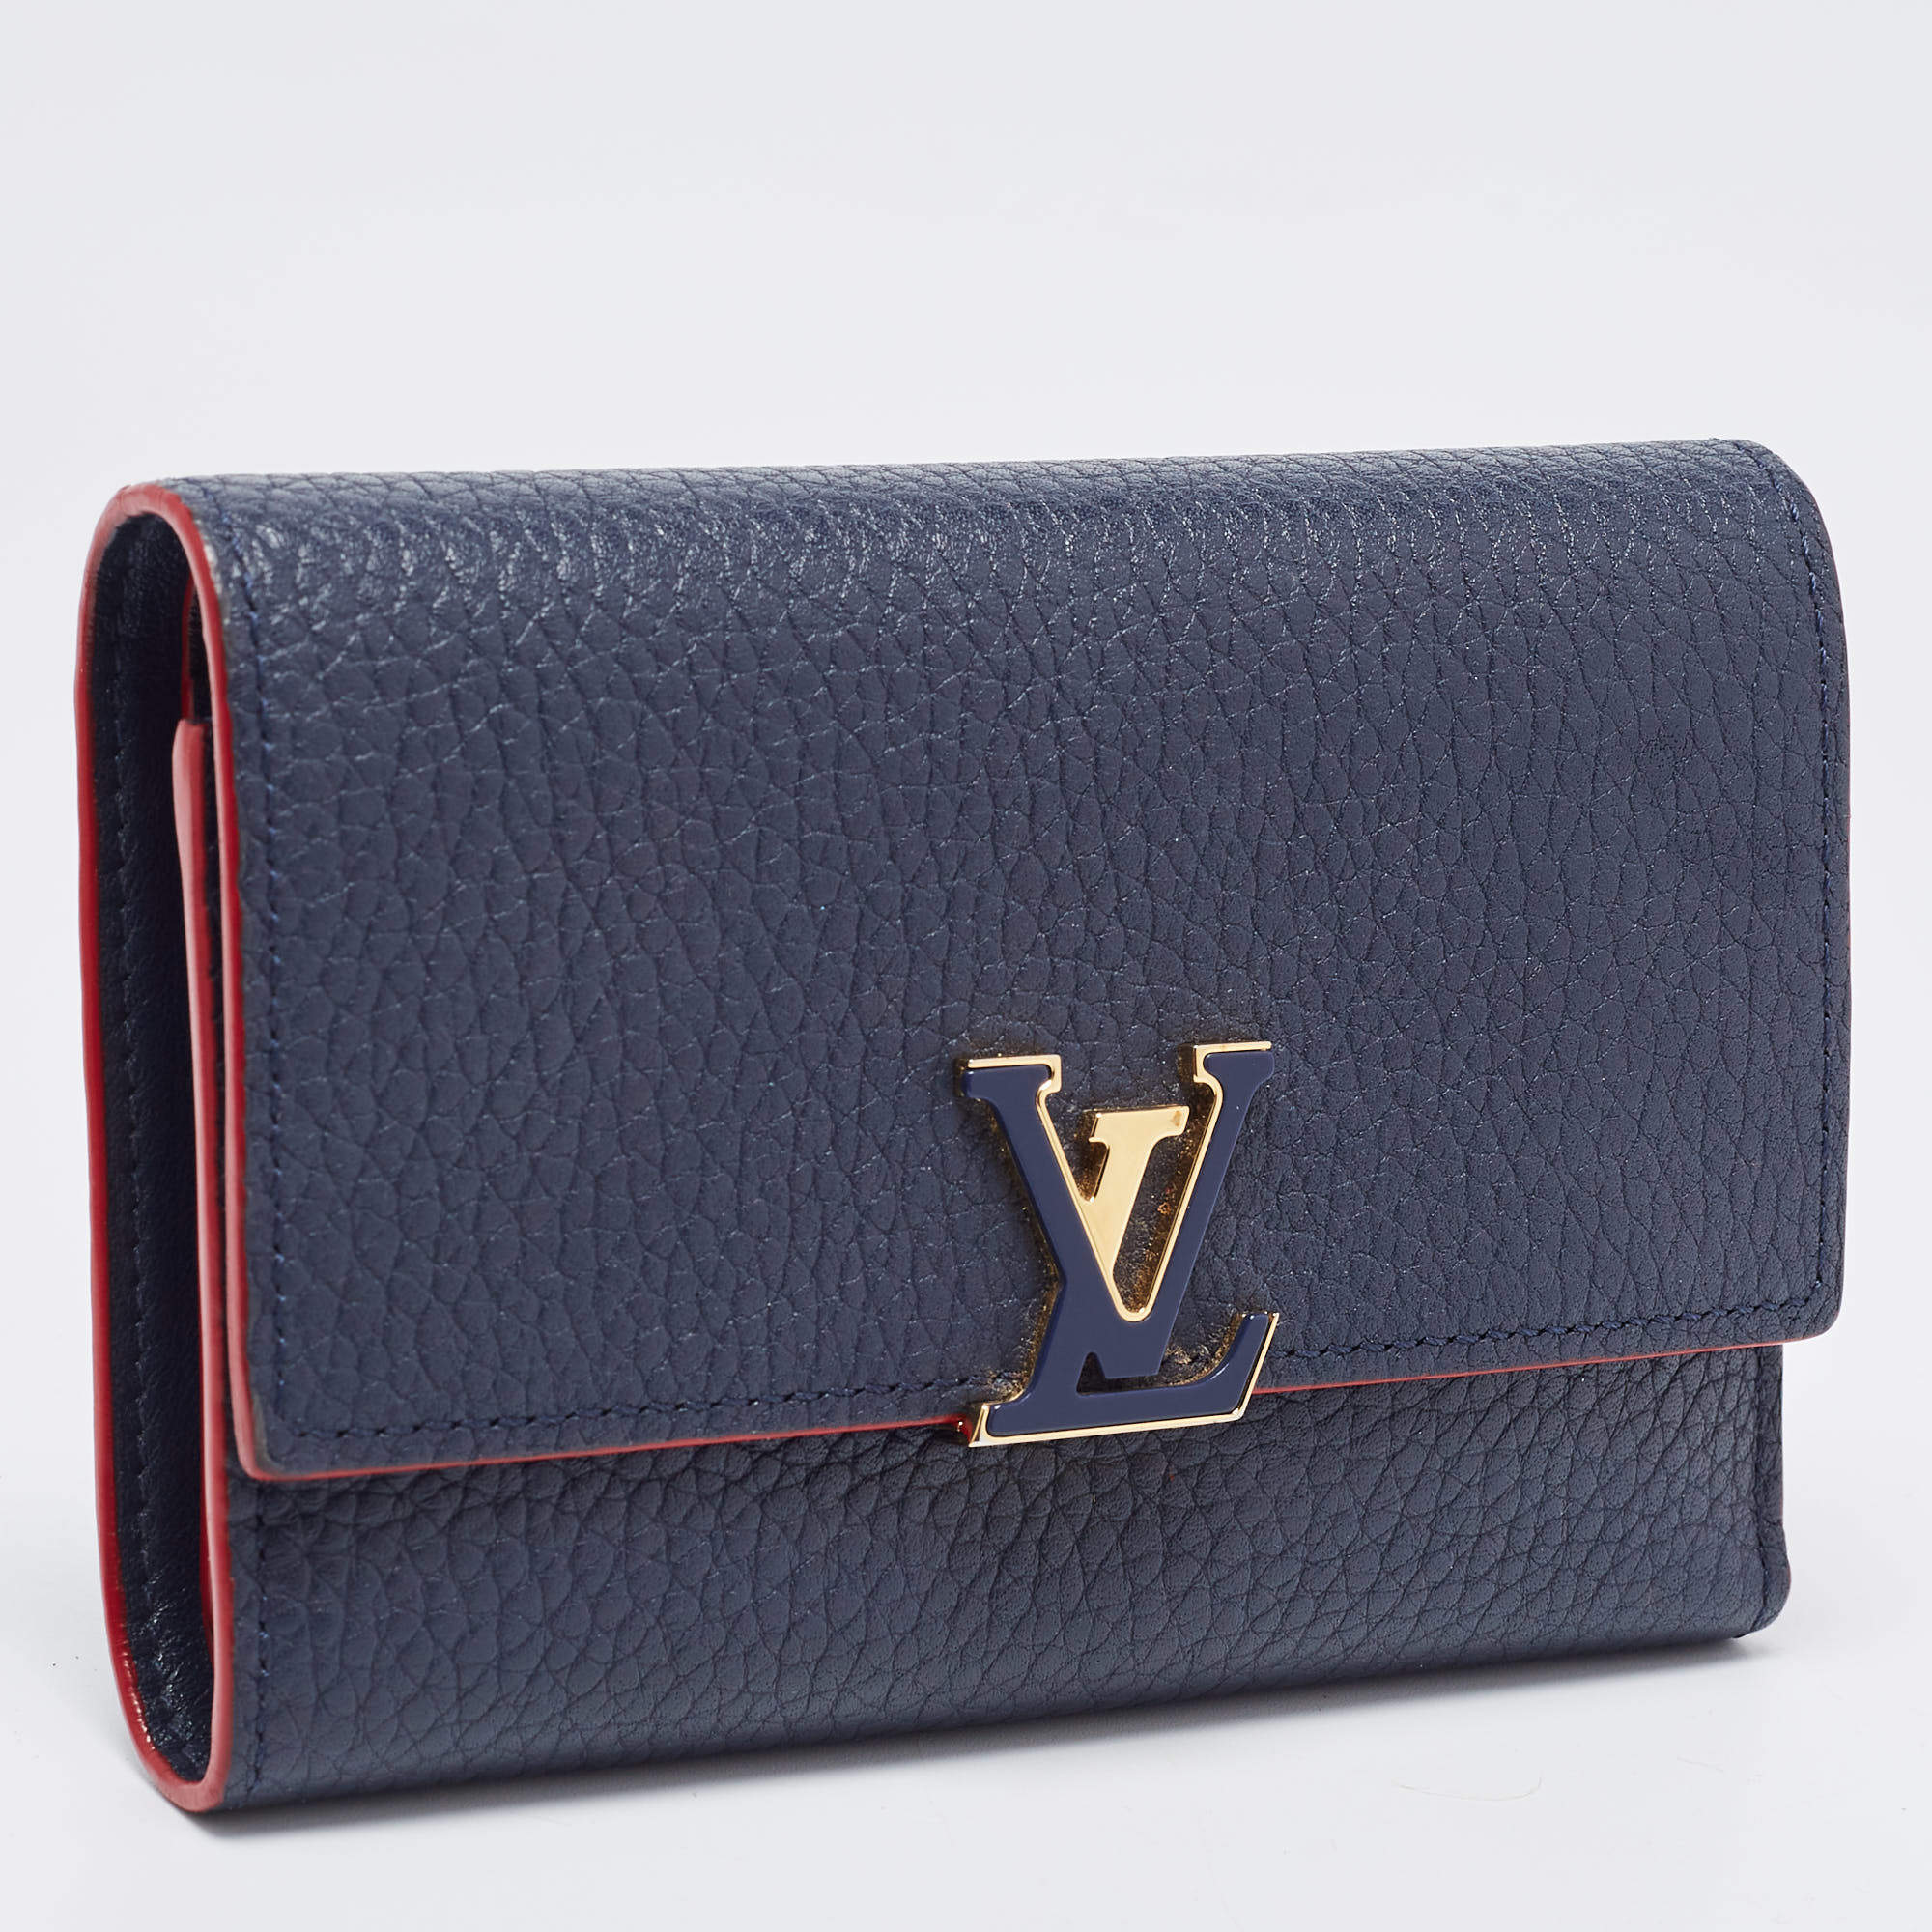 Louis Vuitton Capucines Compact Wallet Purse in Marine Rouge Taurillon -  SOLD